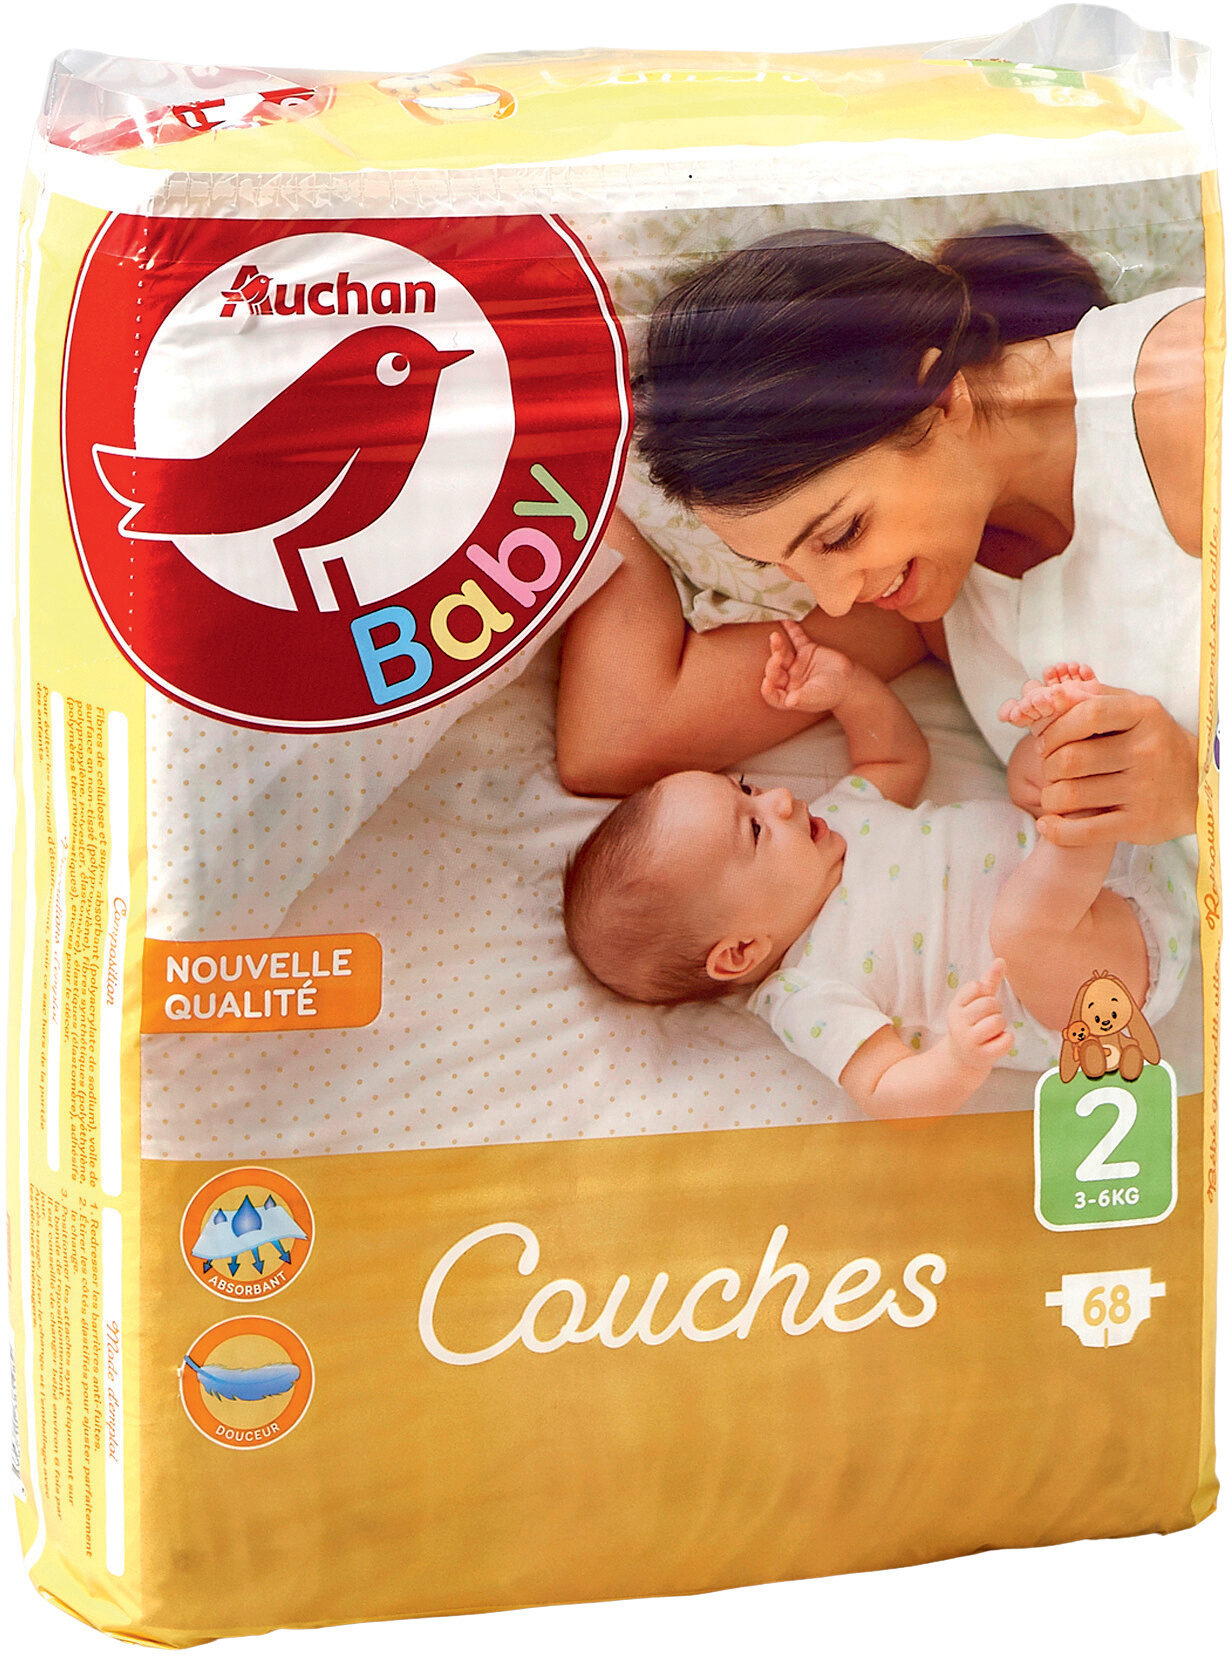 AUCHAN BABY : Couches taille 2 x 68 - Product - fr